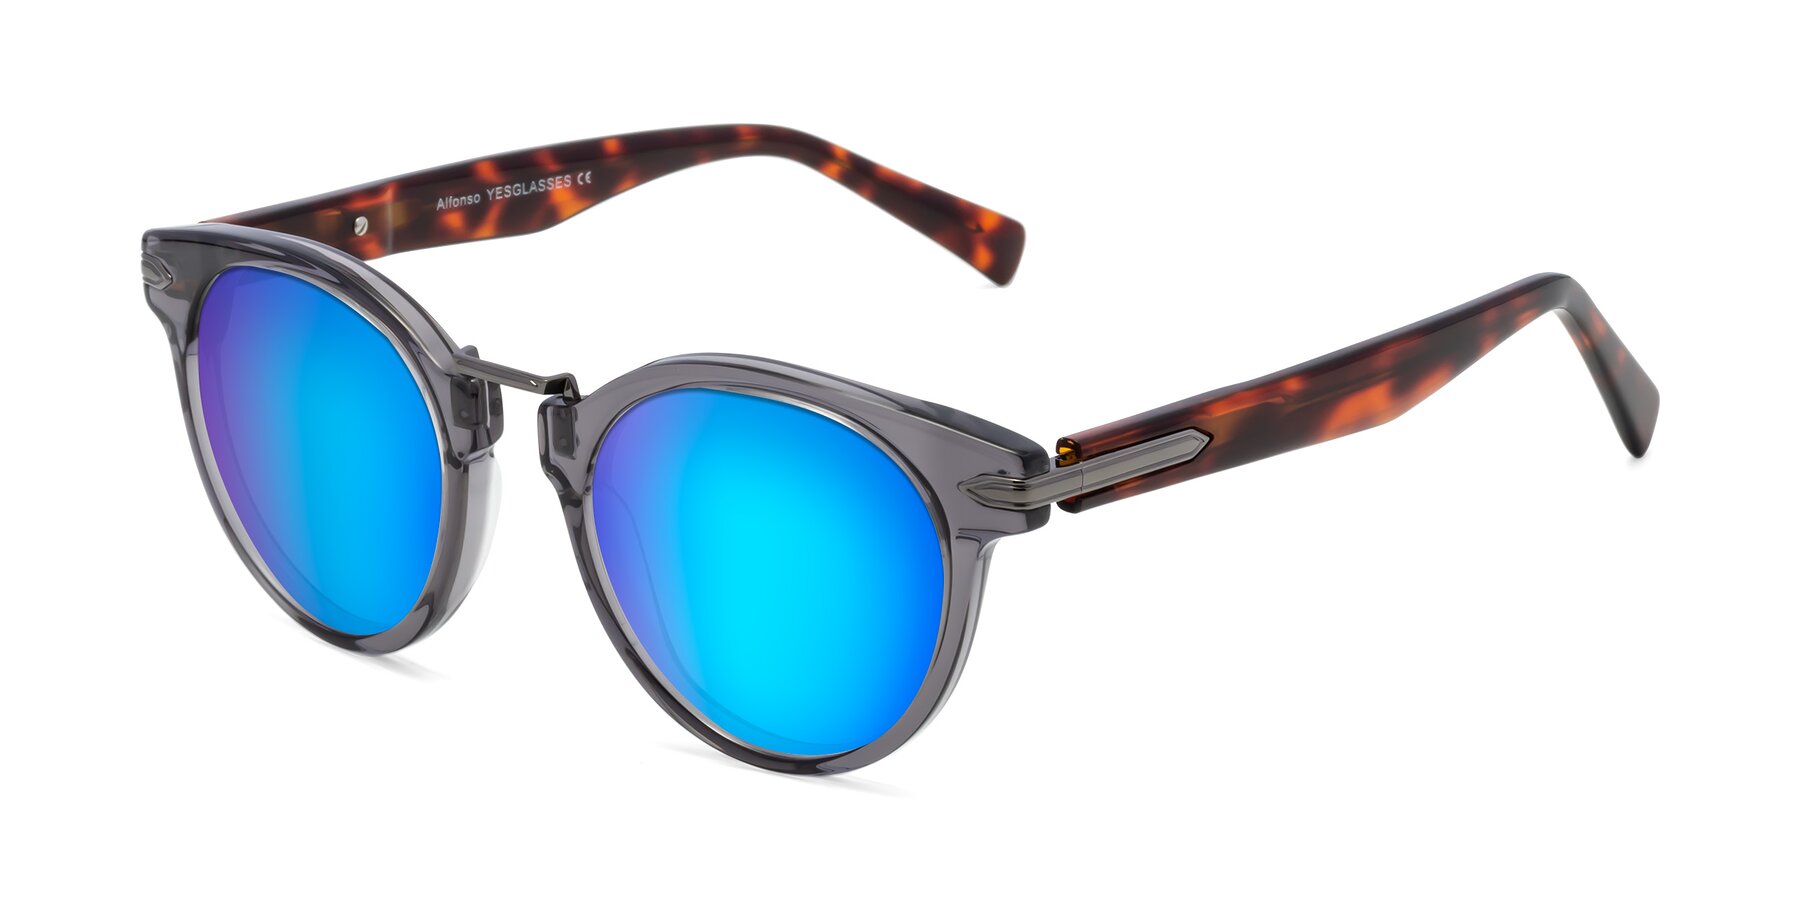 Angle of Alfonso in Gray /Tortoise with Blue Mirrored Lenses